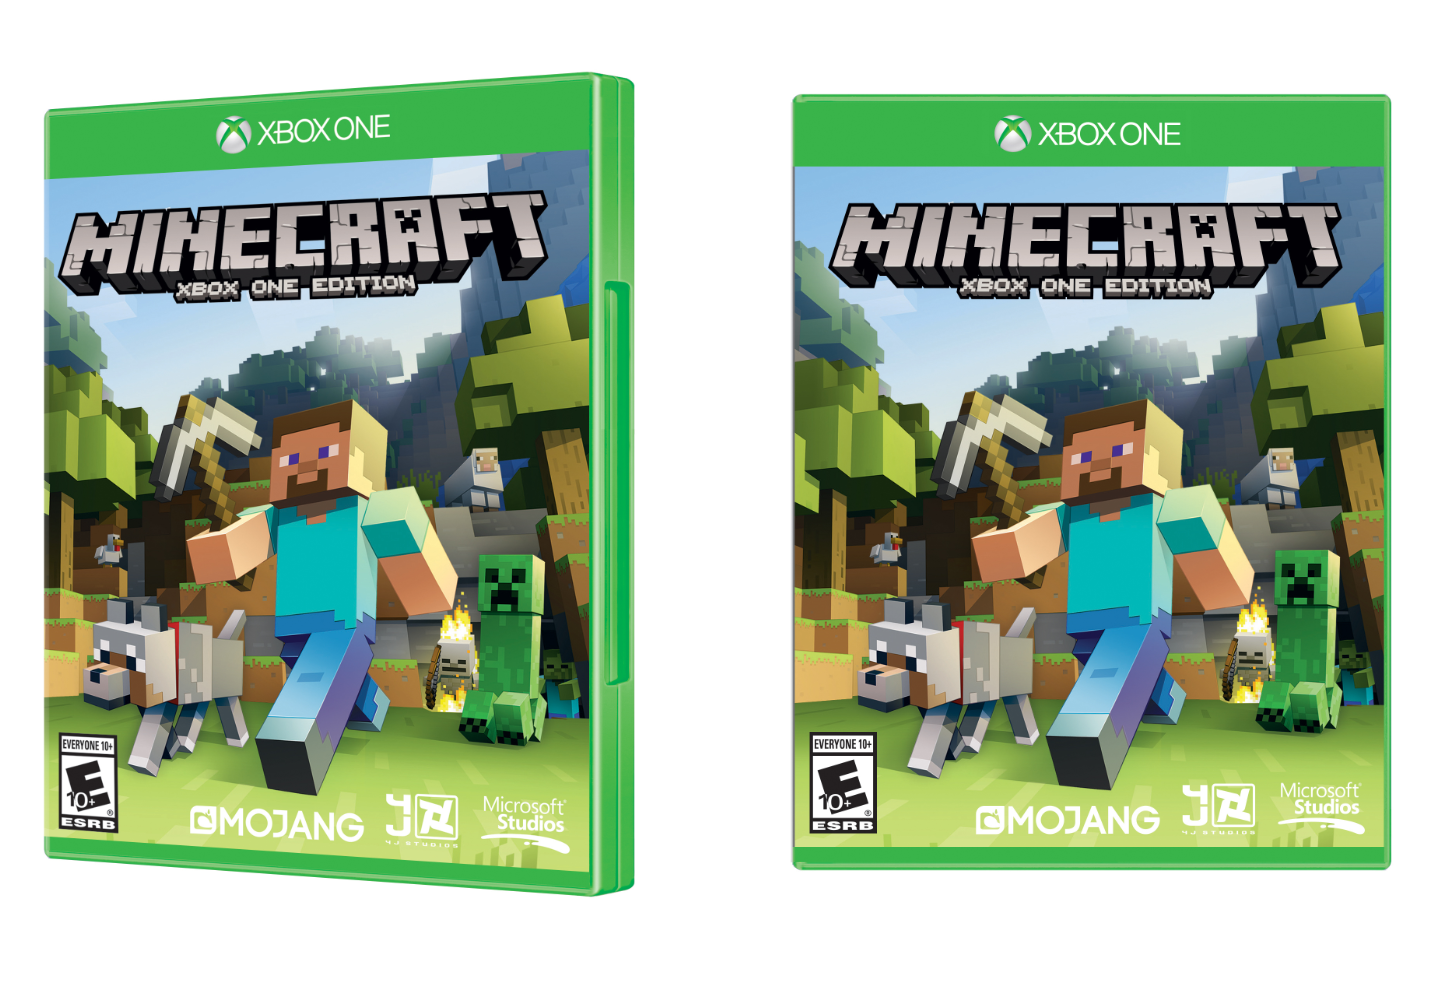 lotus Hover Botsing Minecraft: Xbox One Edition Reaches Retail Stores November 18 - Xbox Wire